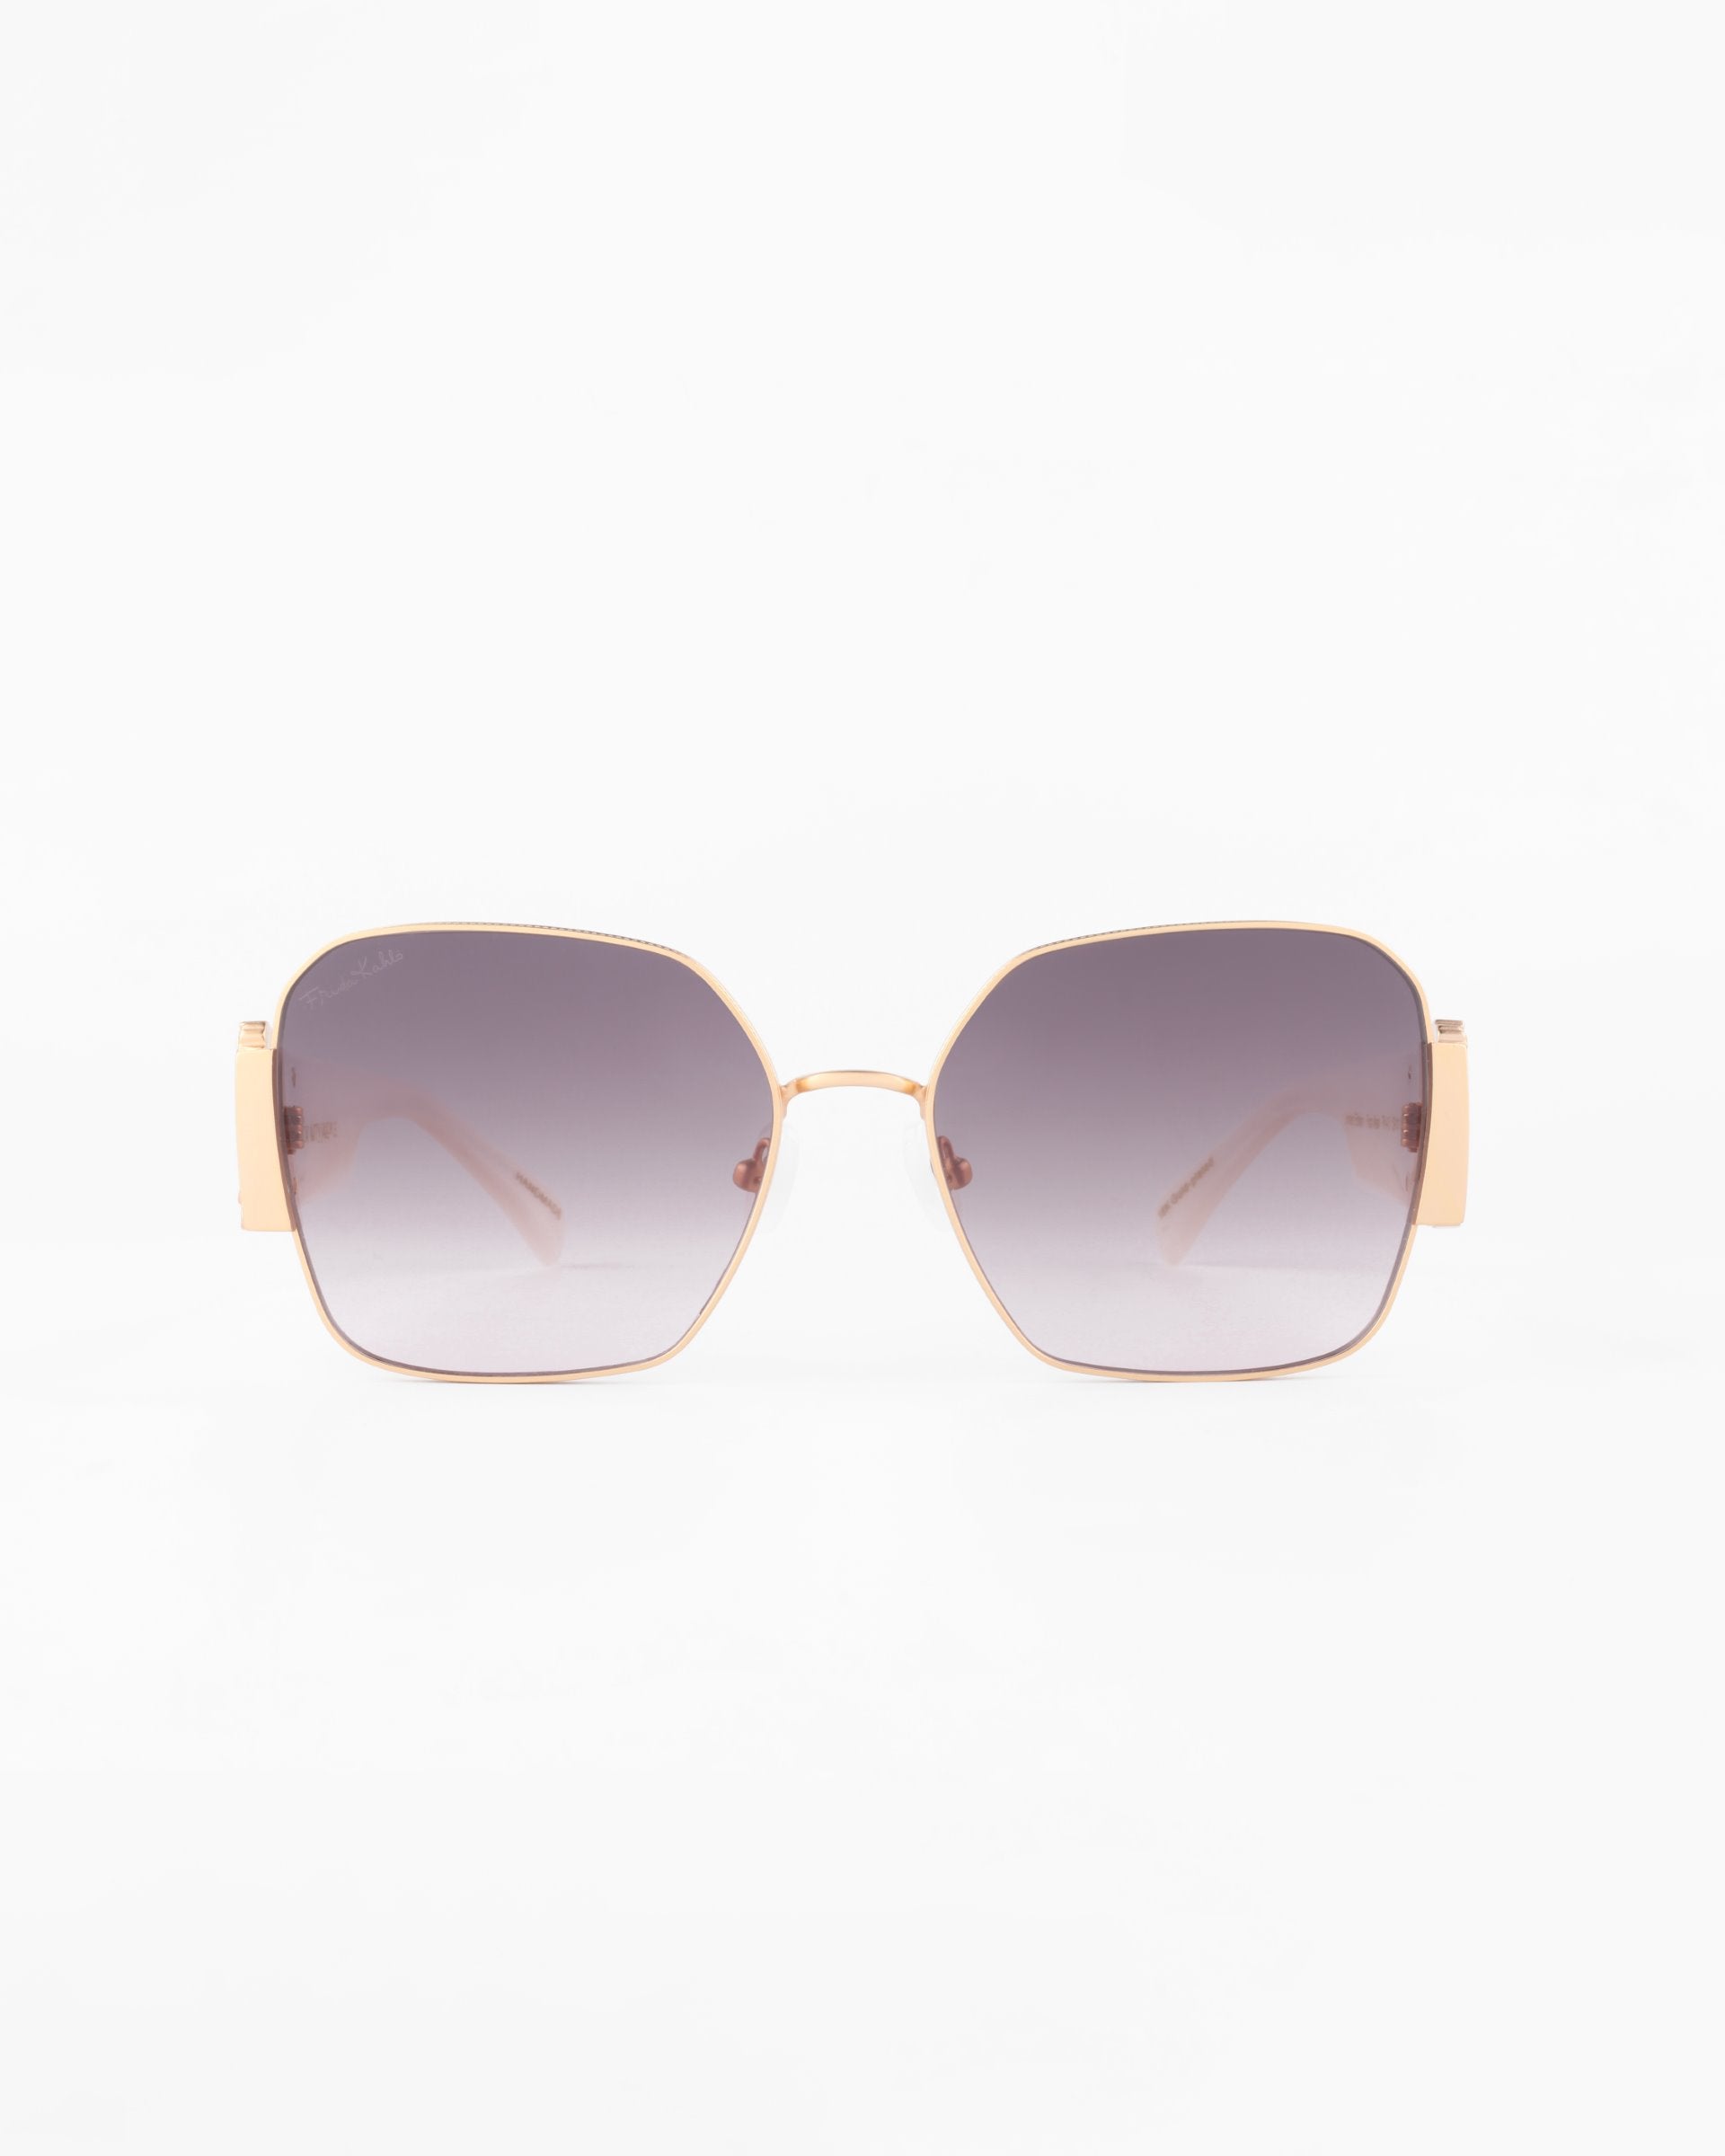 A pair of Frida Mask sunglasses by For Art&#39;s Sake® with large, square lenses that have a gradient tint from dark gray to clear. Made with gold-plated stainless steel and ultra-lightweight nylon lenses, they offer 100% UVA &amp; UVB protection. The sunglasses have thin arms and a minimalist design, set against a white background.